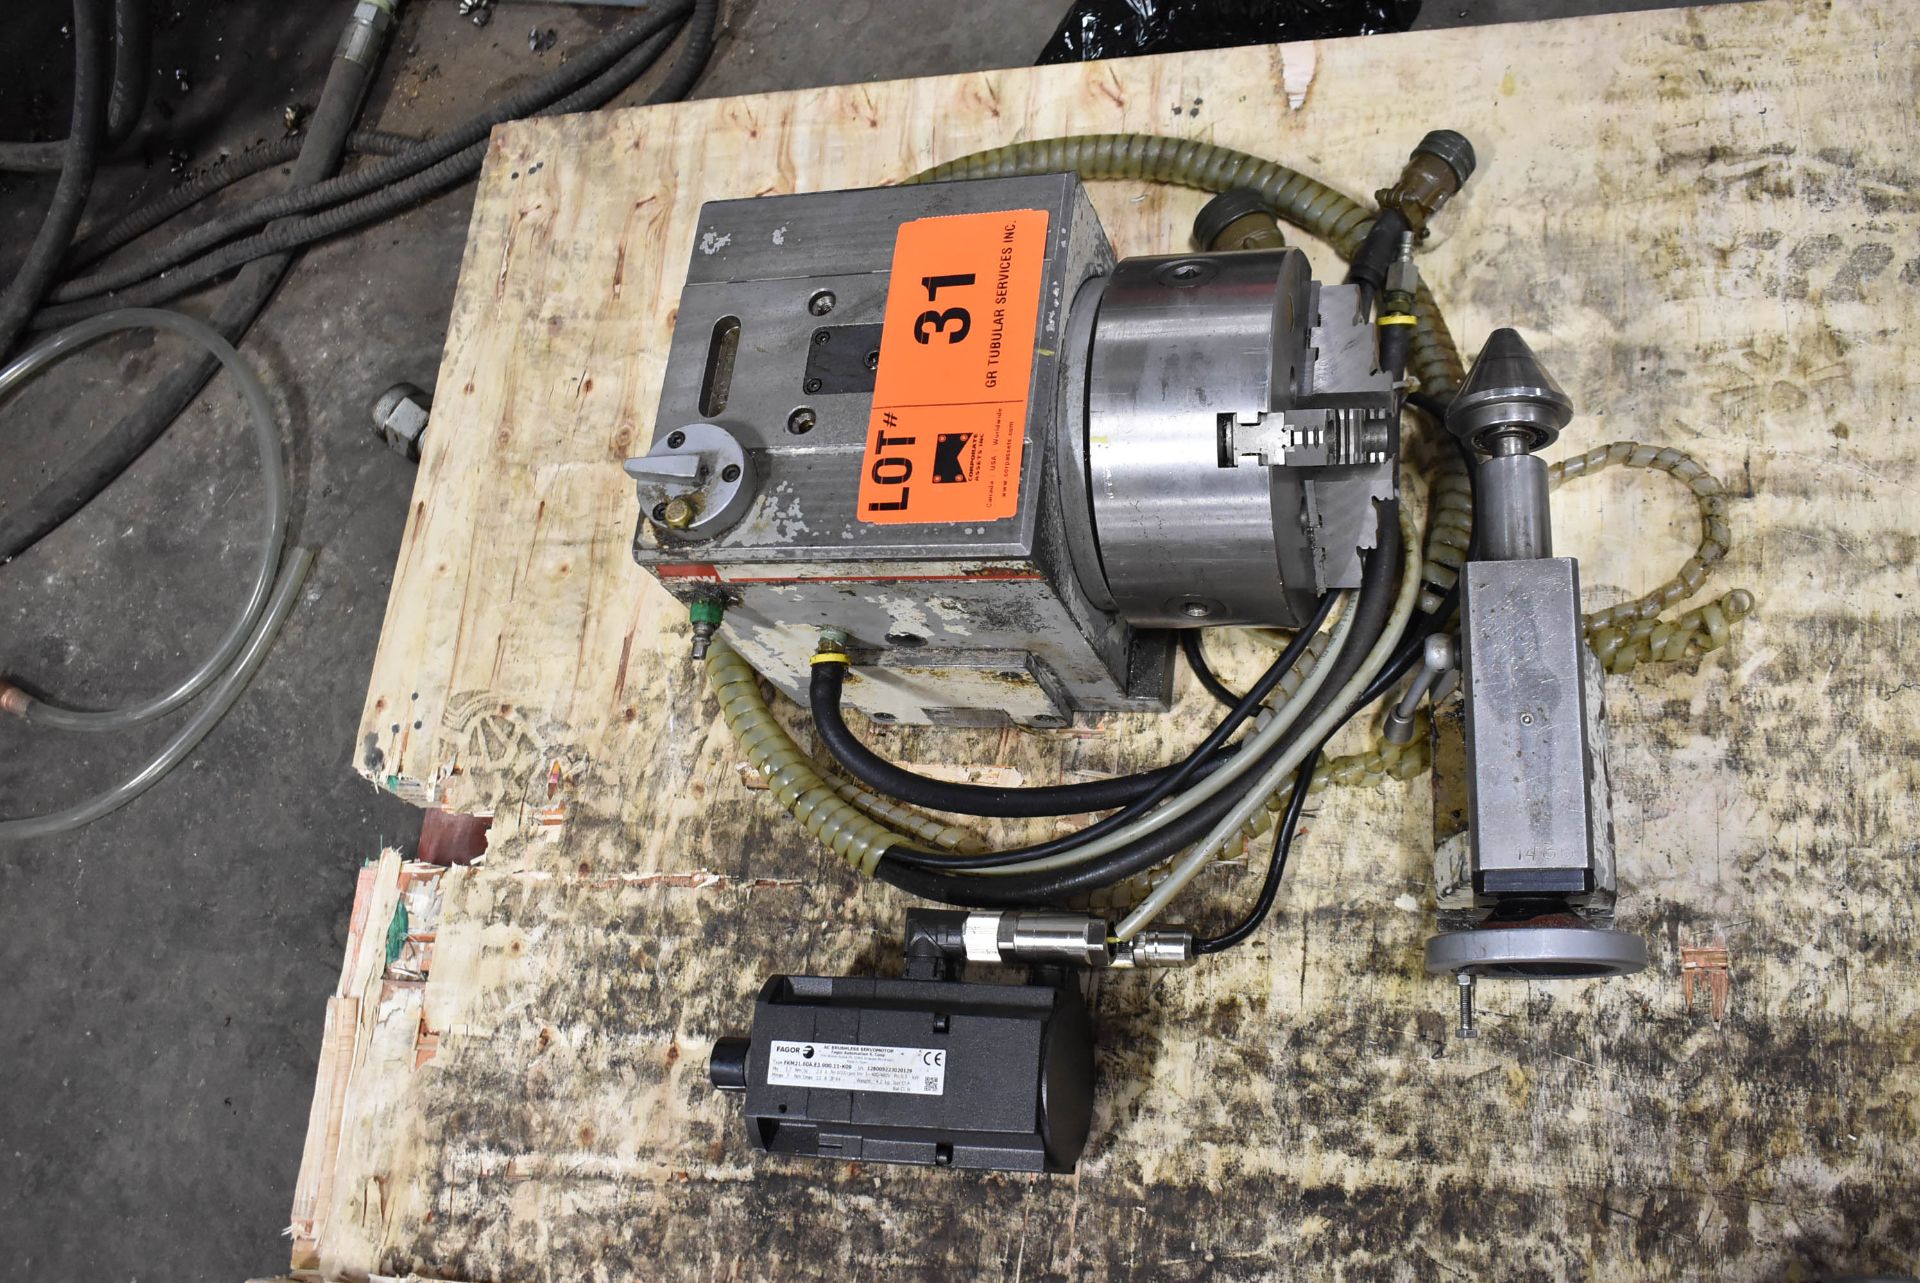 SMW RT160PY 10" ROTARY 3 JAW CHUCK 4TH AXIS WITH TAIL STOCK, S/N N/A (LOCATED AT 3601 75 AVENUE,